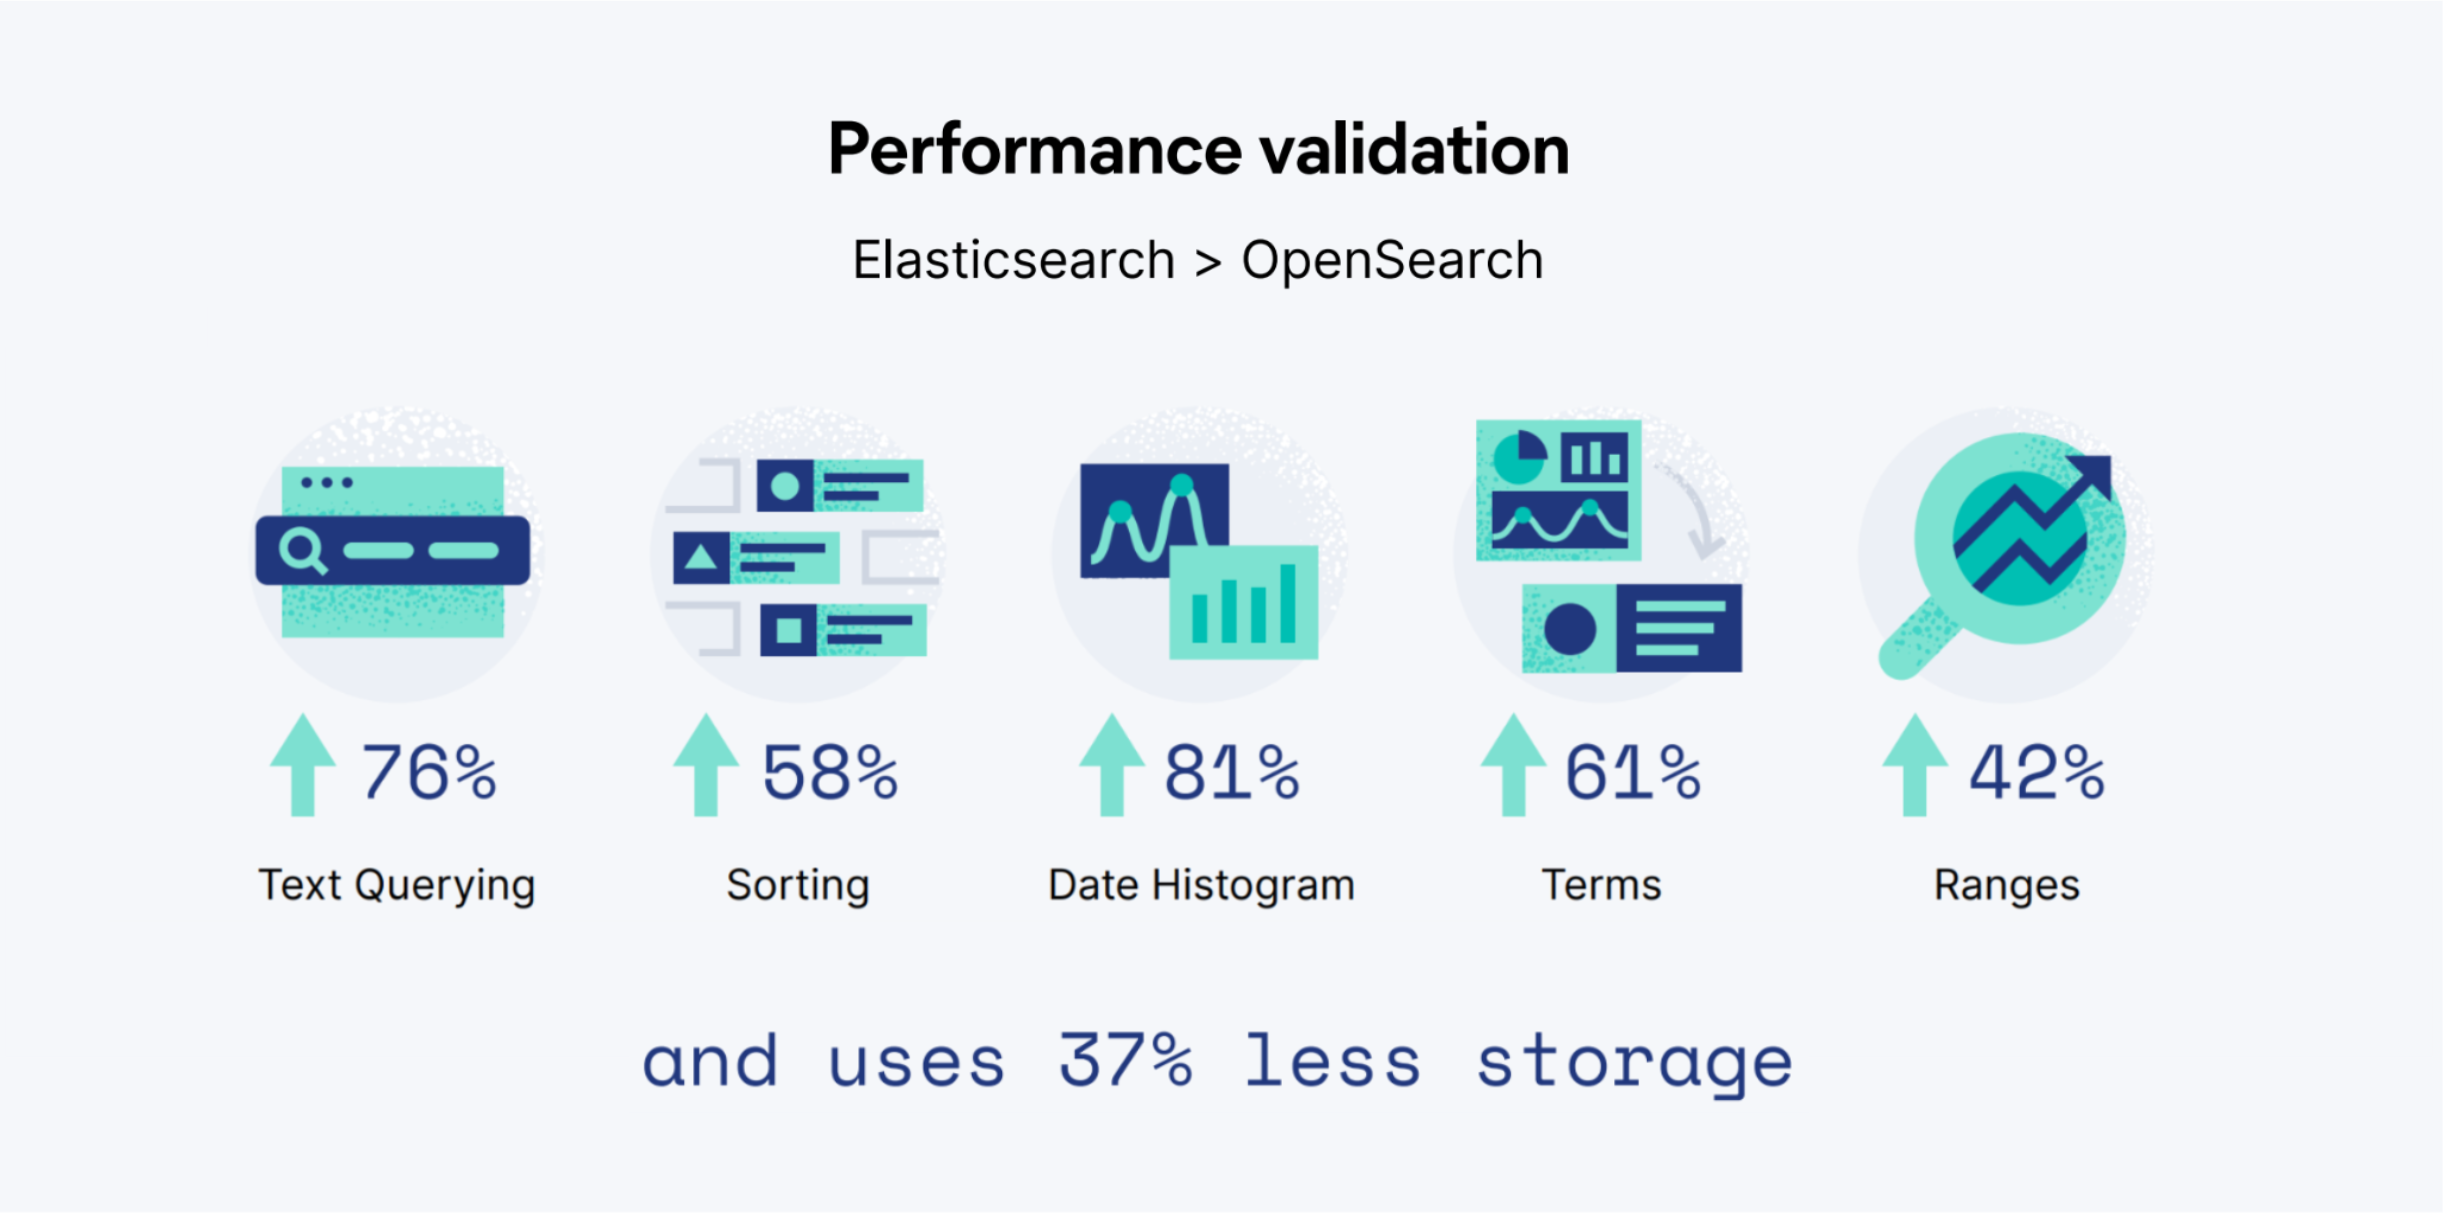 Performance validation: Elasticsearch > Opensearch